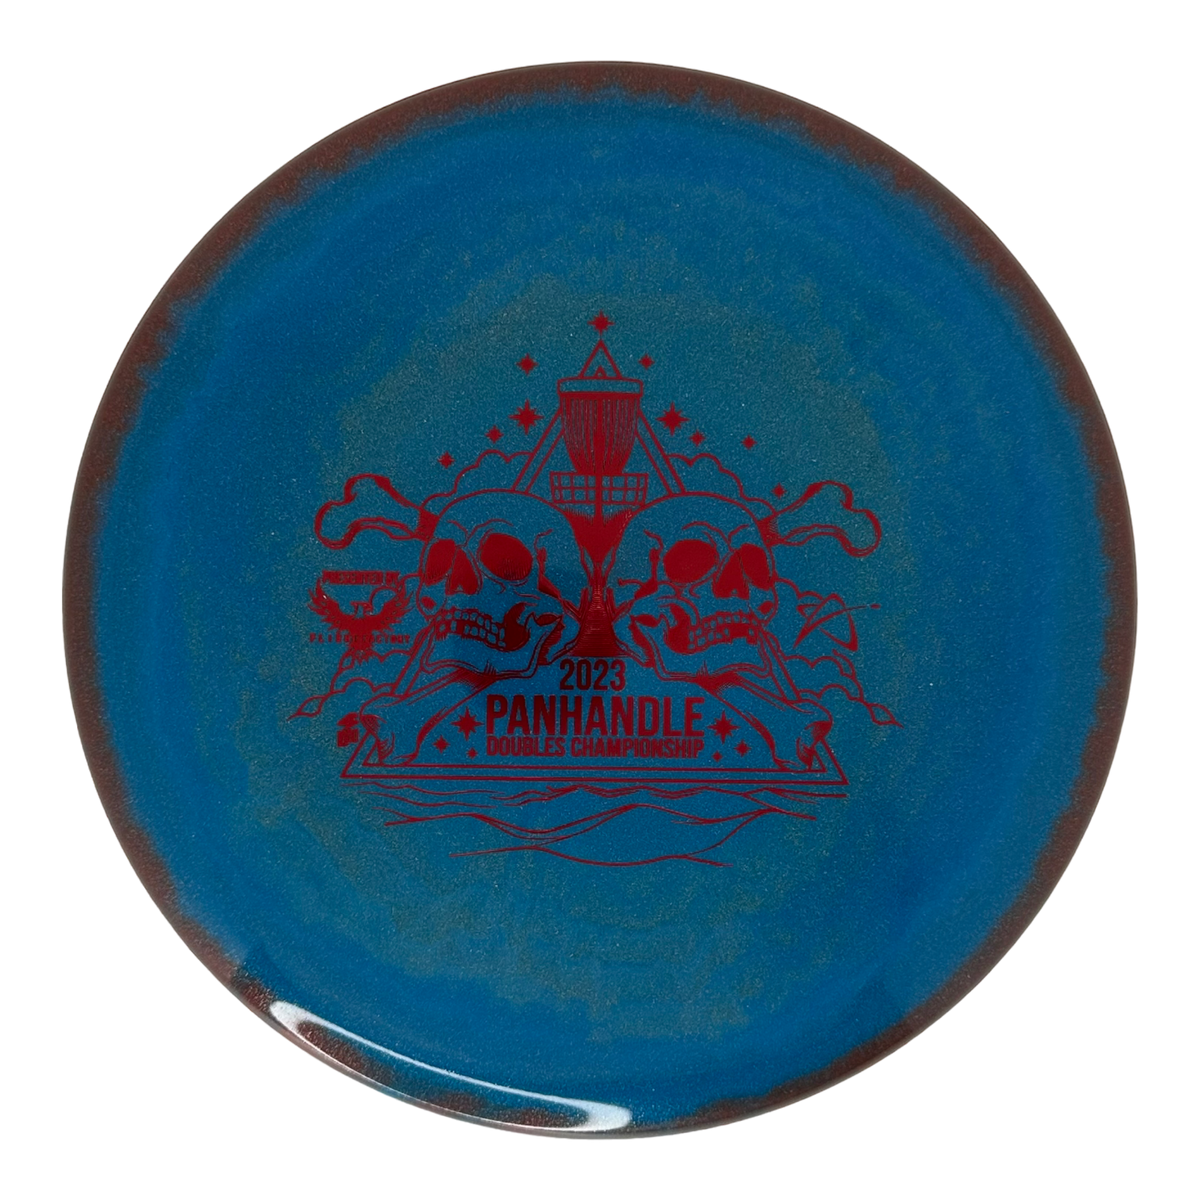 Prodigy 750 Glimmer M4 - 2023 Panhandle Doubles